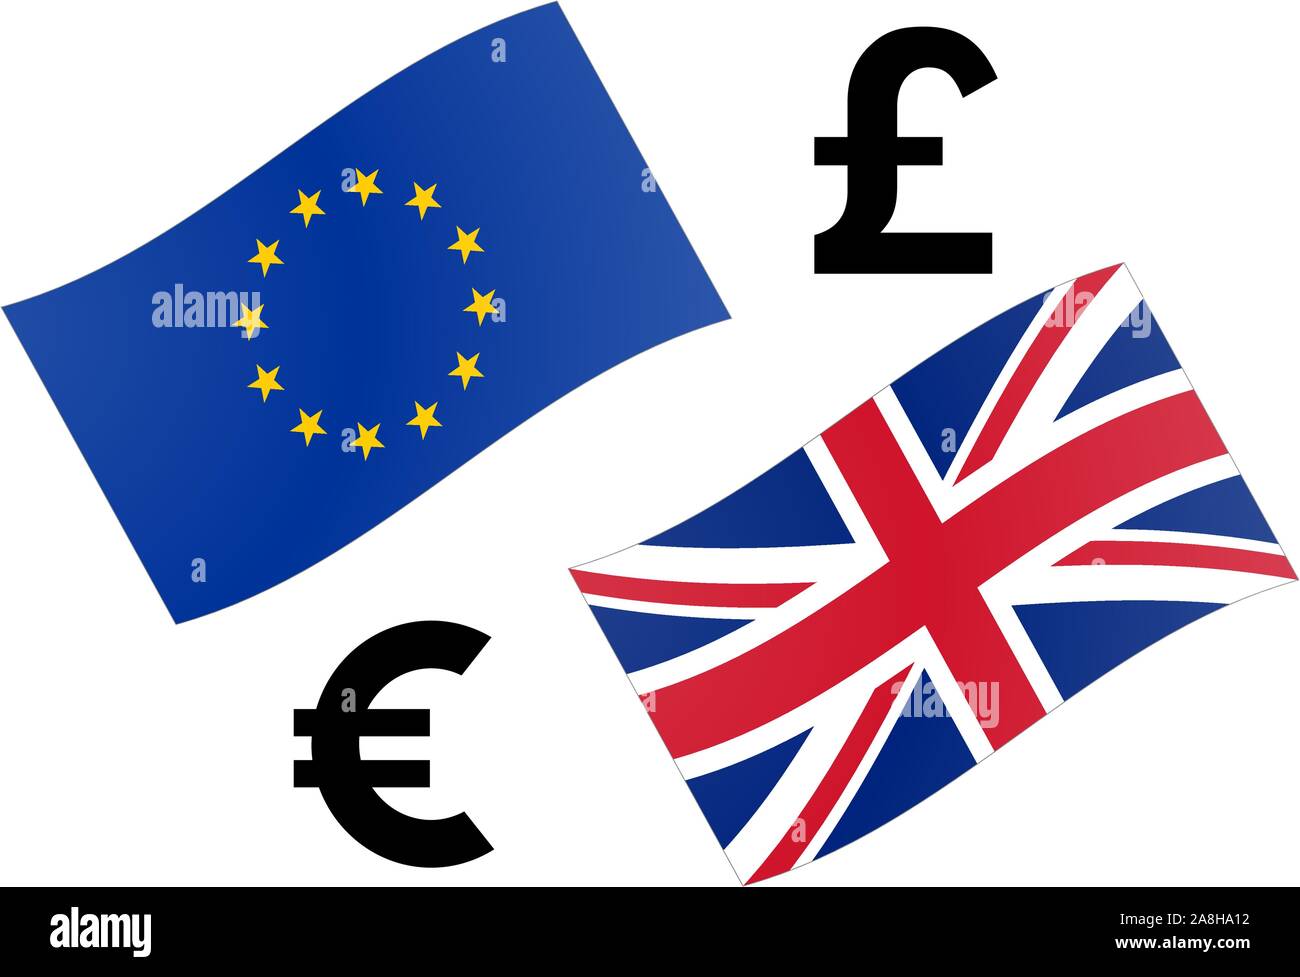 EURGBP forex currency pair vector illustration. EU and UK flag, with Euro and Pound symbol. Stock Vector